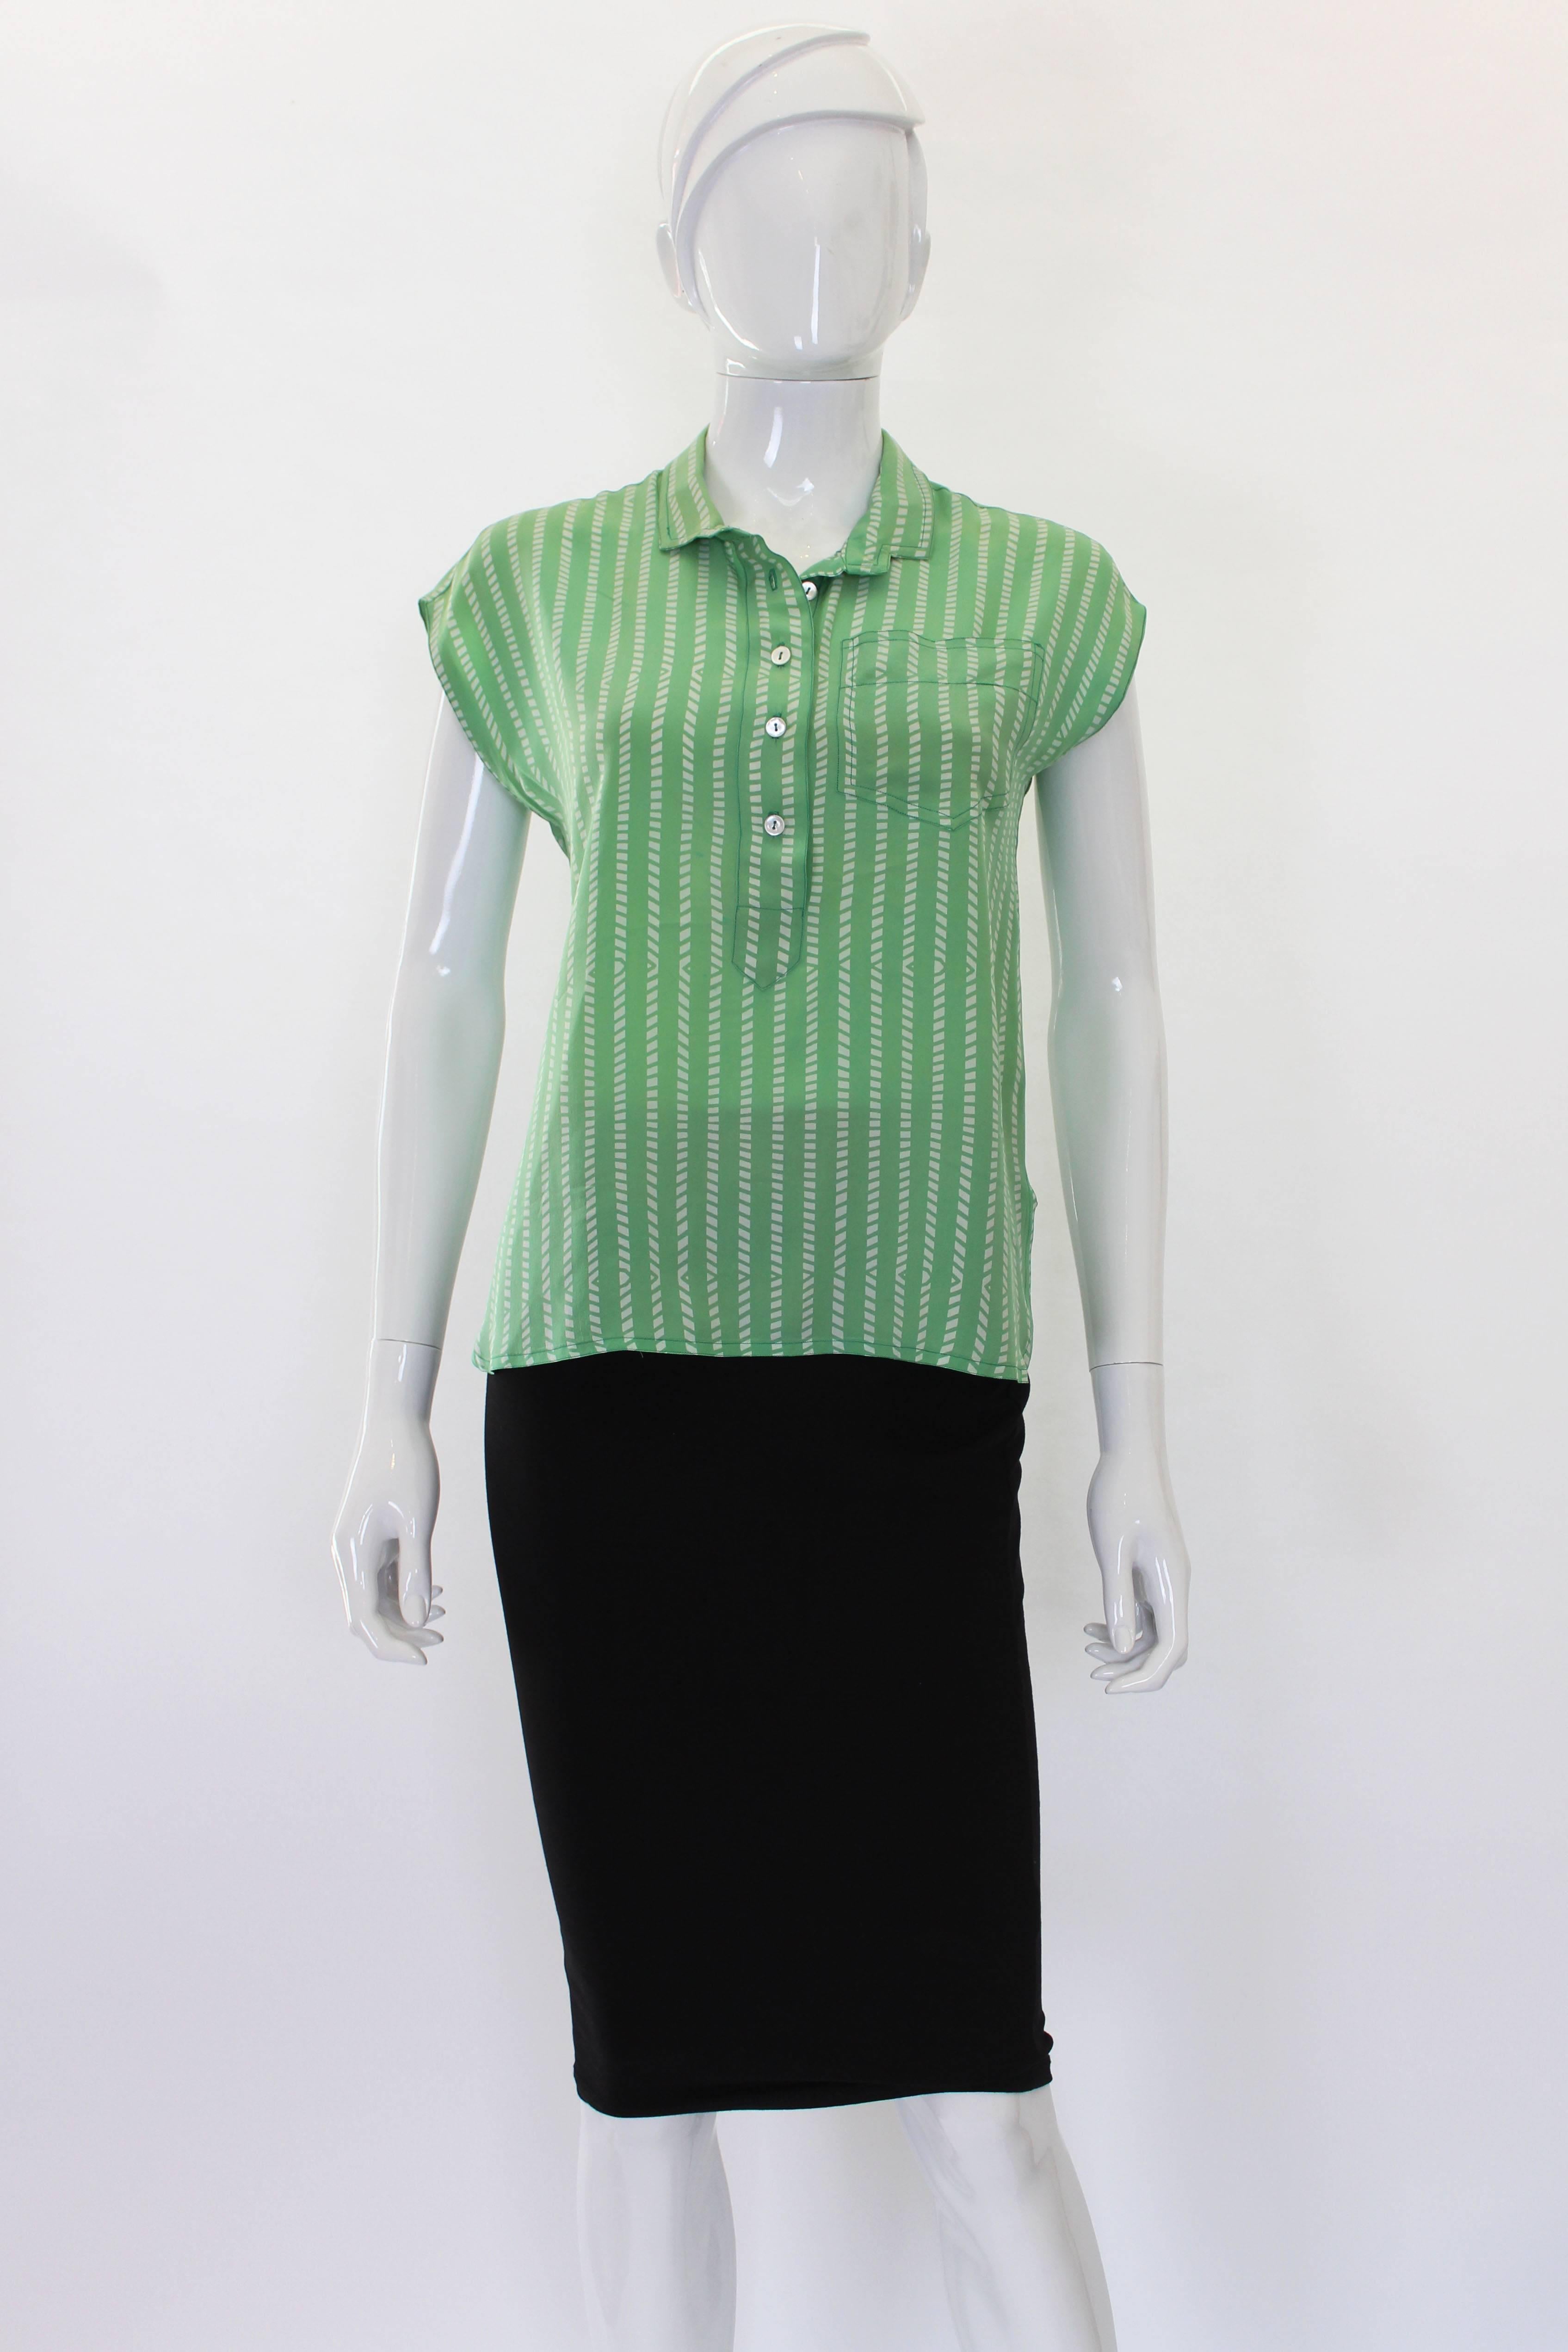 This fine silk blouse is made of a soft apple green with an ivory geometric print. It's a late 80s/early 90s piece in perfect condition. The sleeves give a slight cap over the shoulder without any additional sleeve being added. All 4 button down the